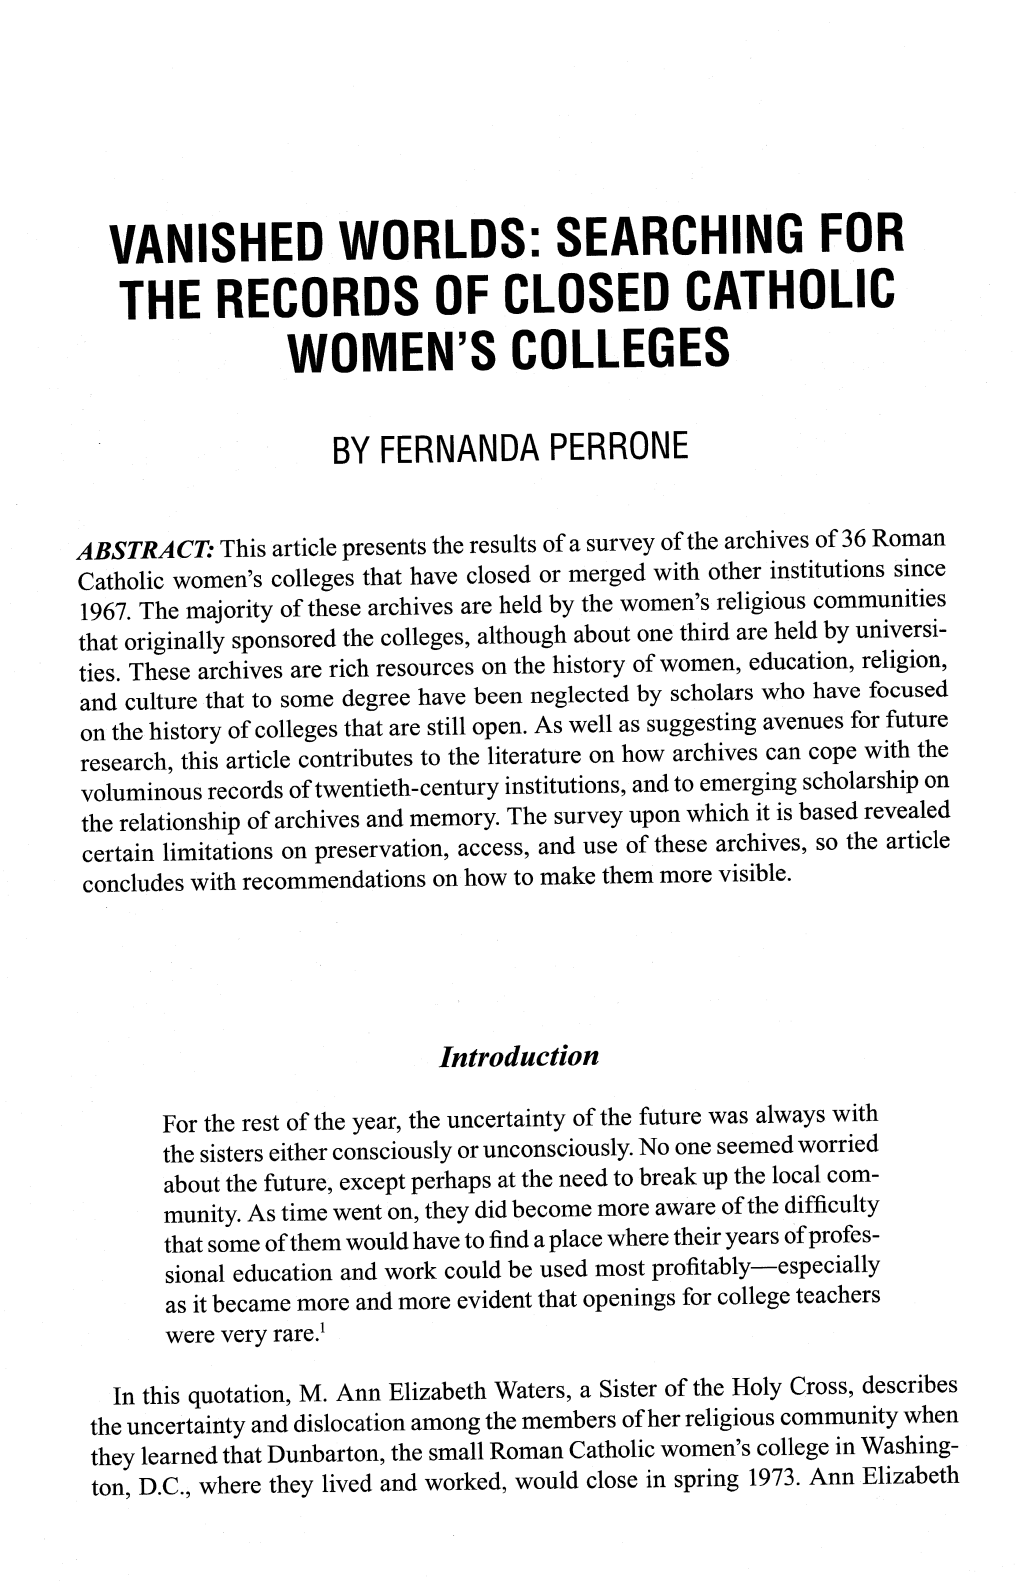 Searching for the Records of Closed Catholic Women's Colleges